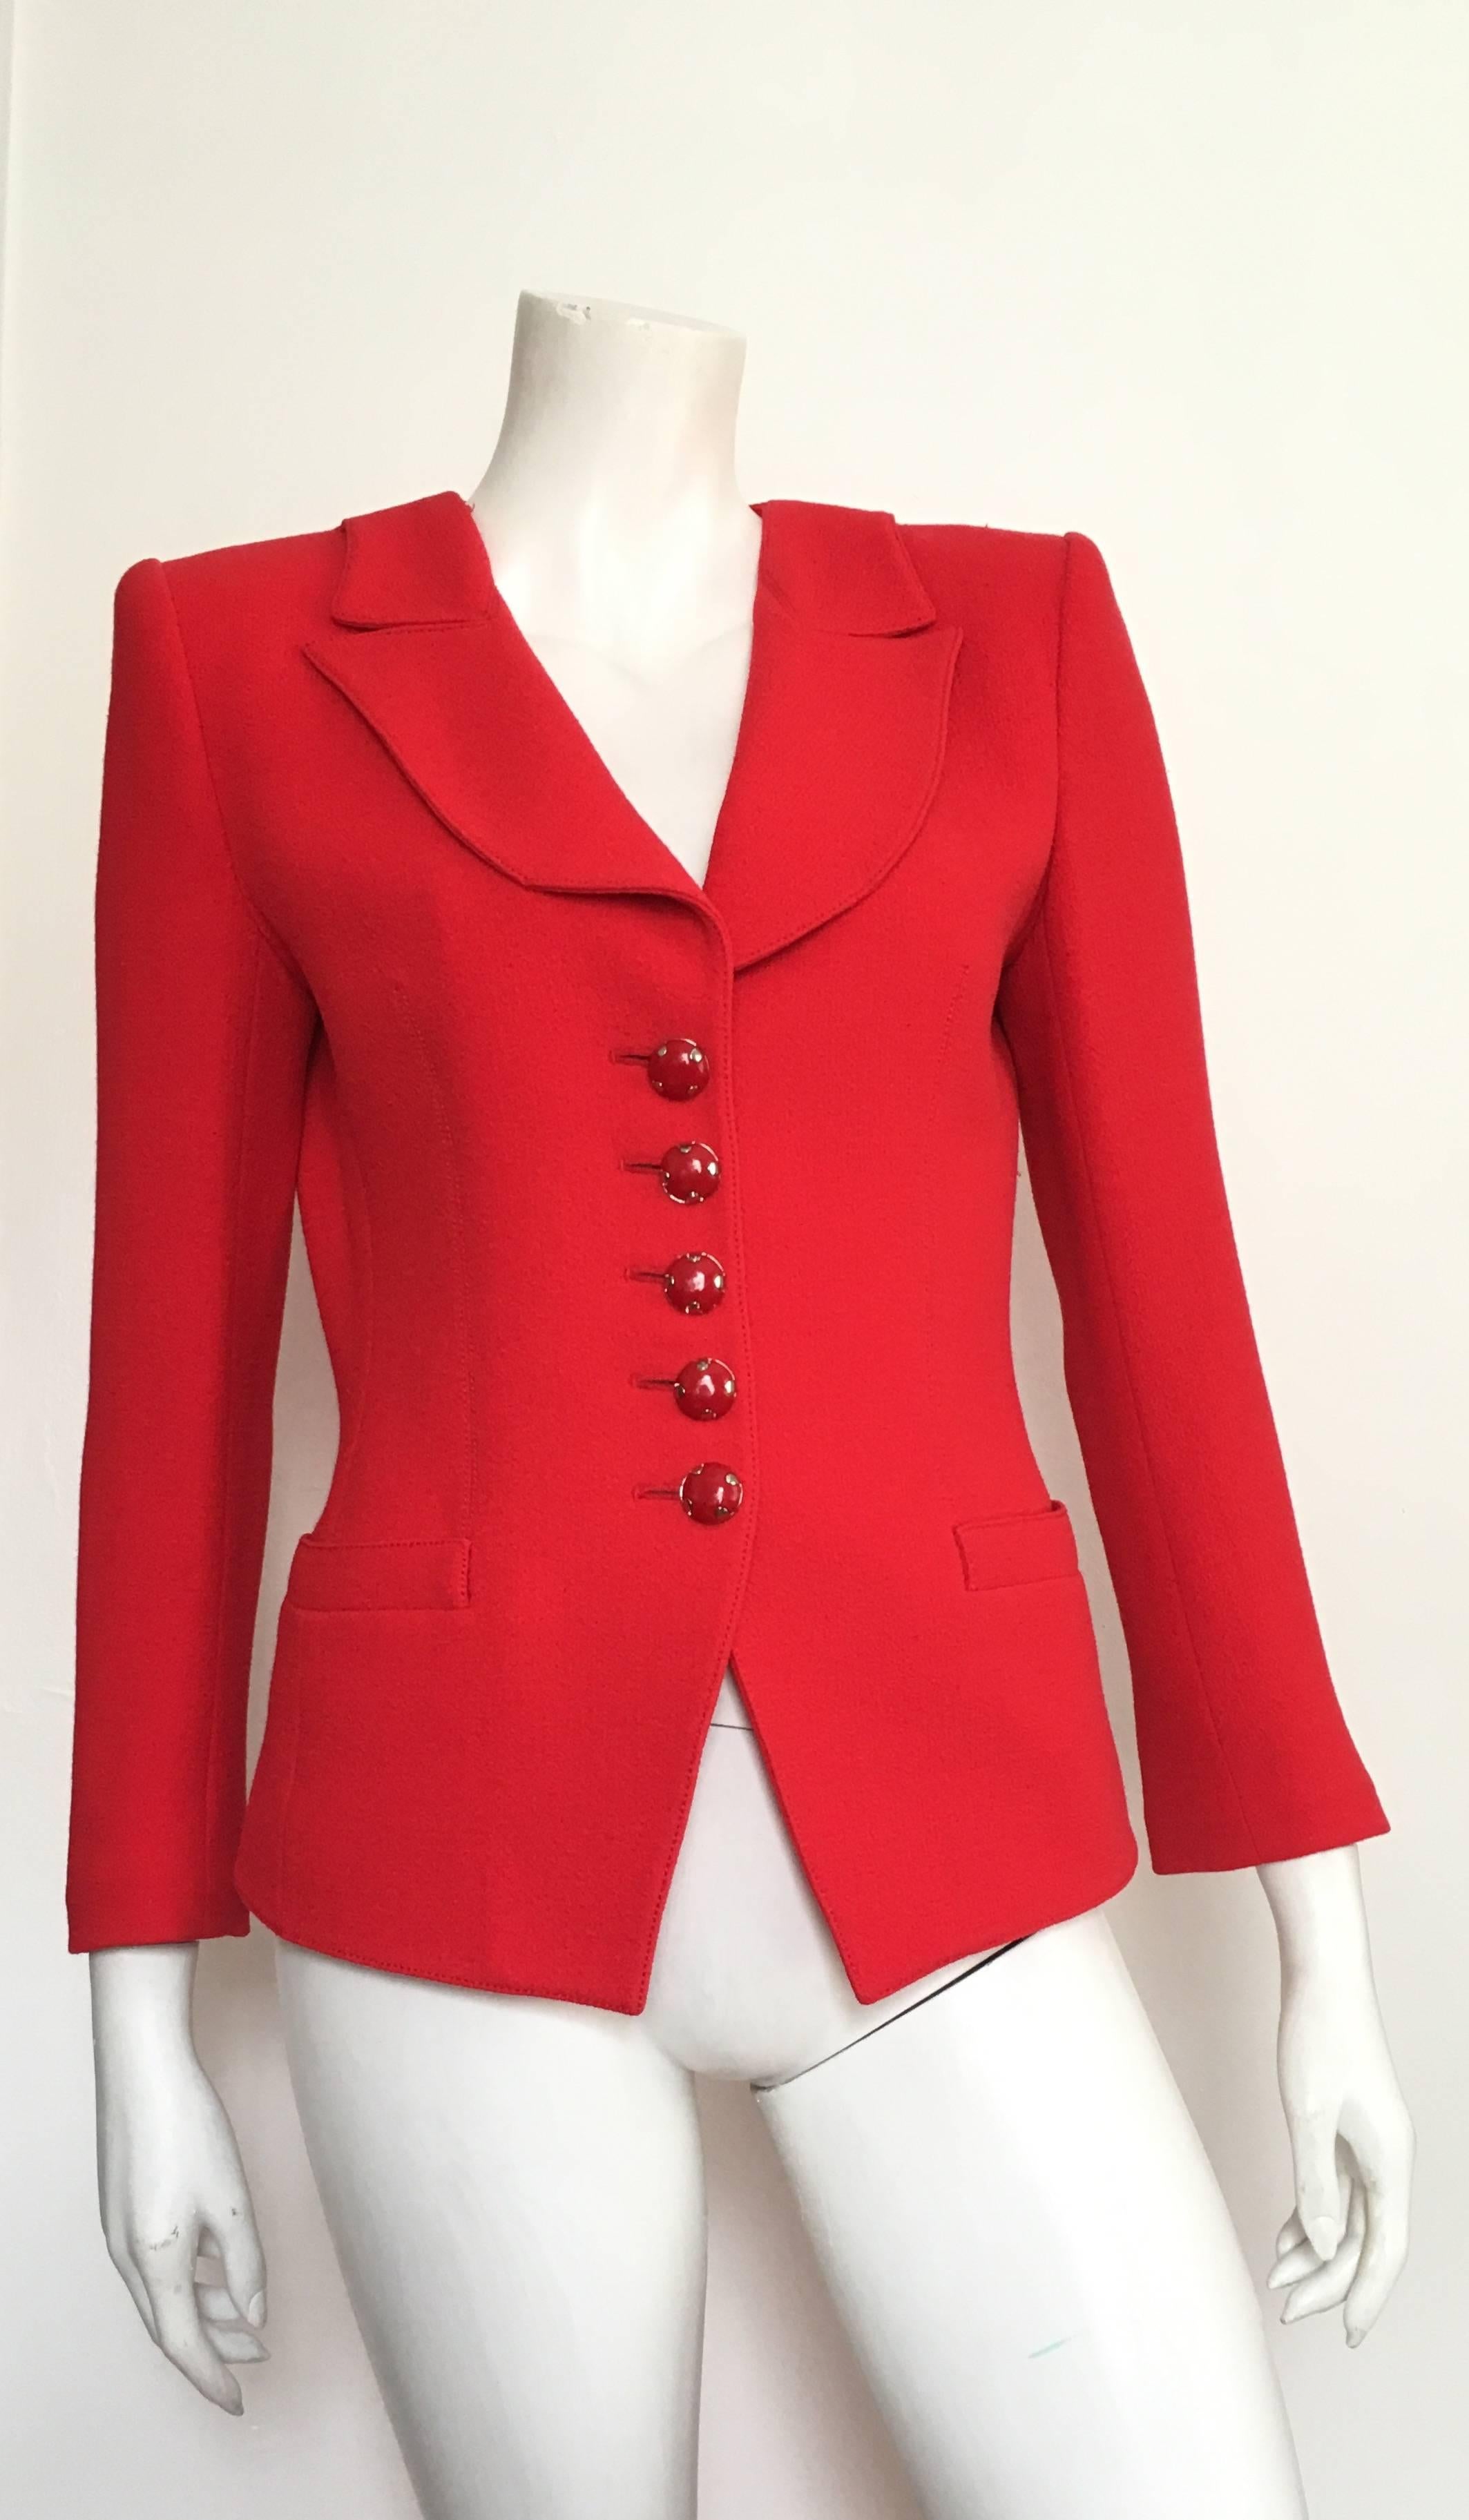 Emanuel Ungaro Red Power Wool Crepe Suit Size 6, 1990s For Sale 3